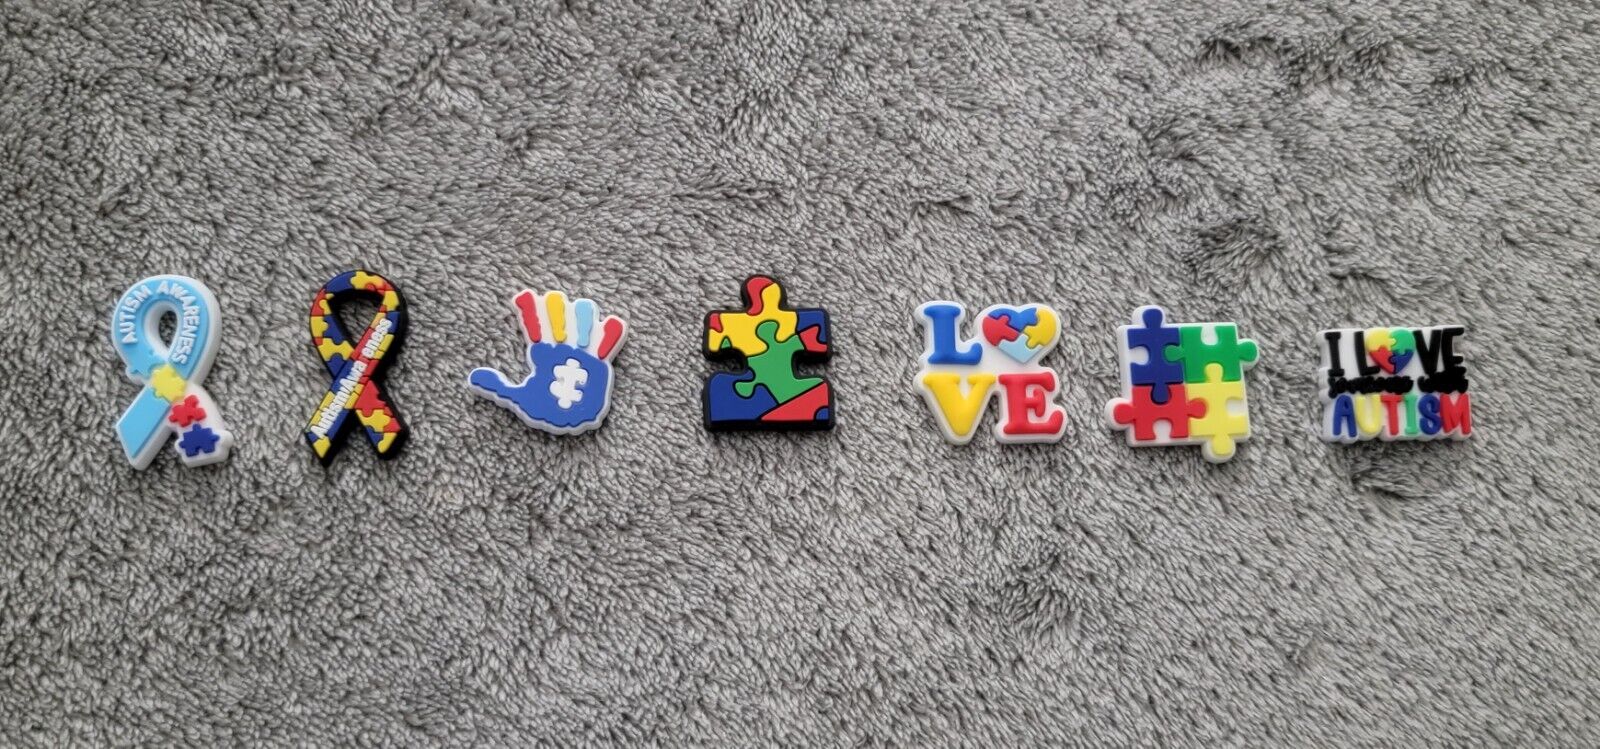 7 Autism Awareness Magnets For Fridge Or Play Magnet Boards